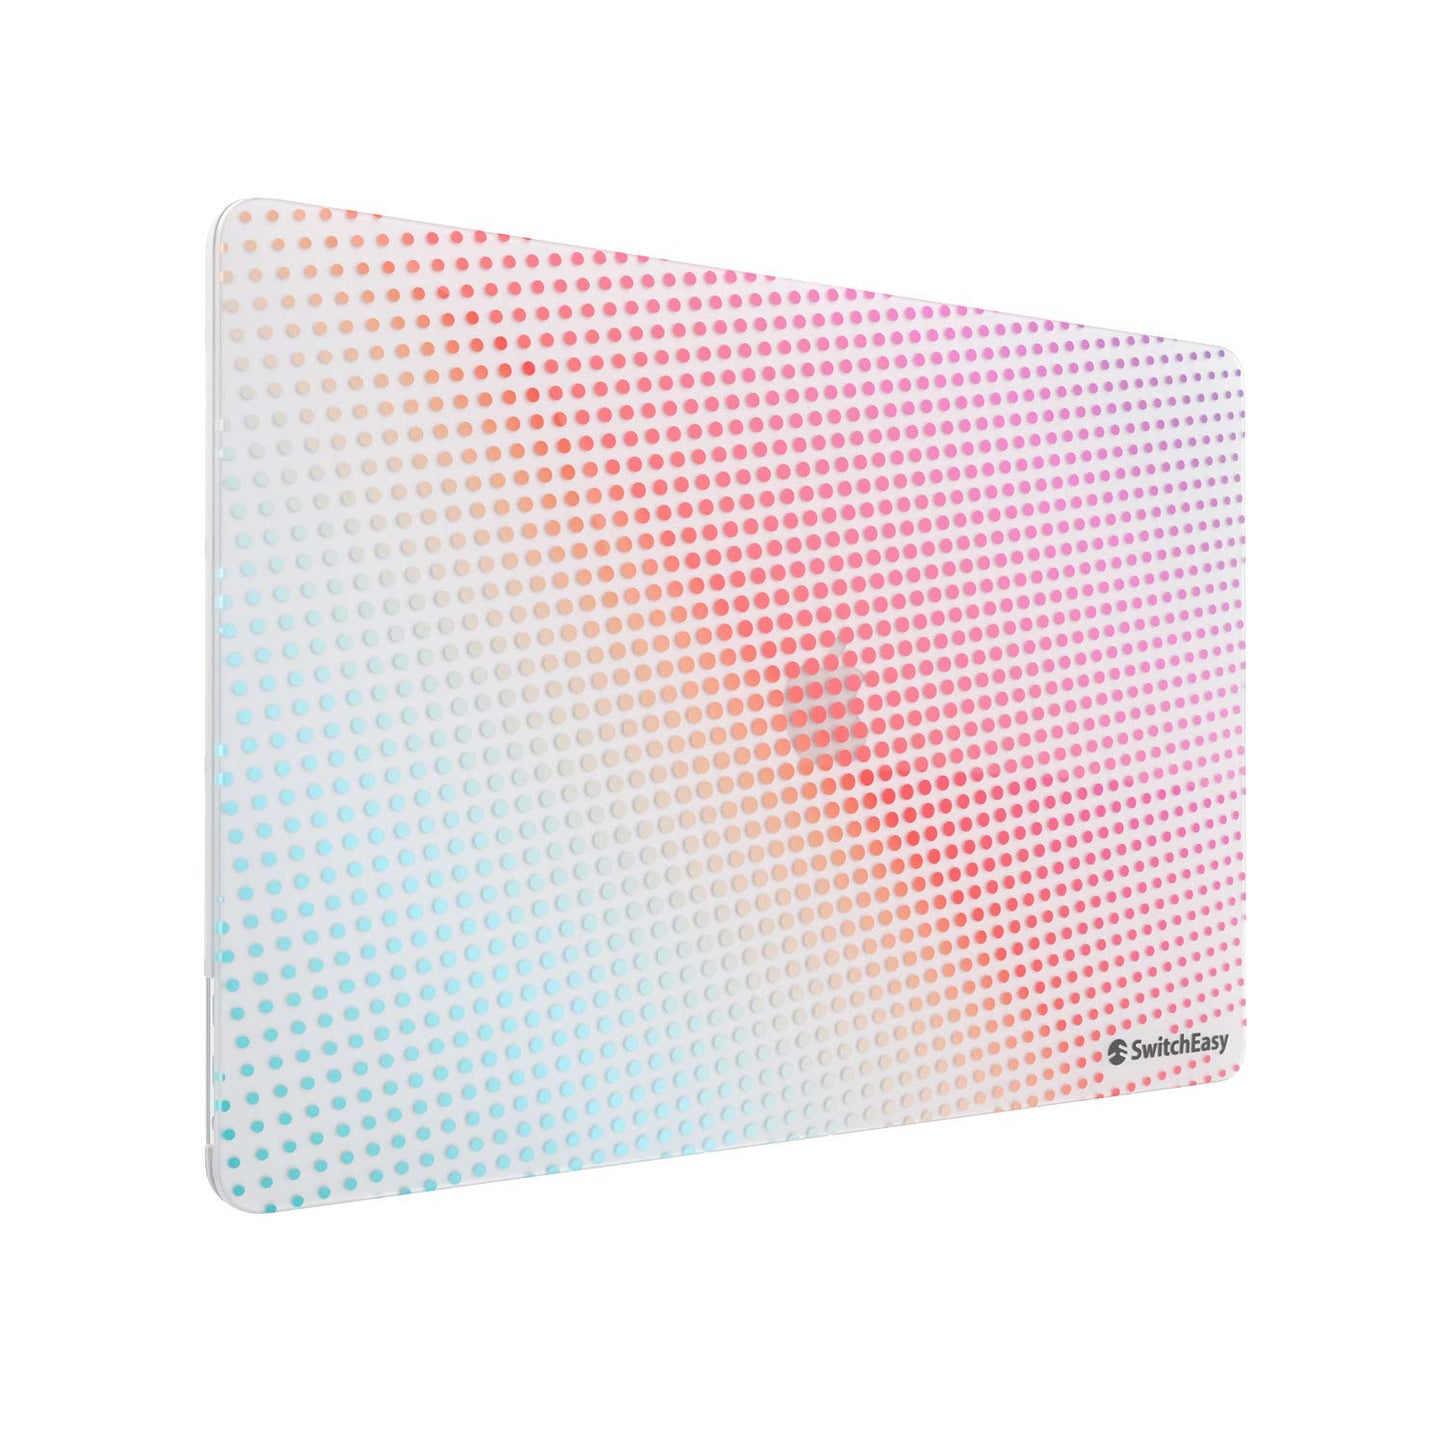 SwitchEasy Dots Hard Shell Case for Apple MacBook